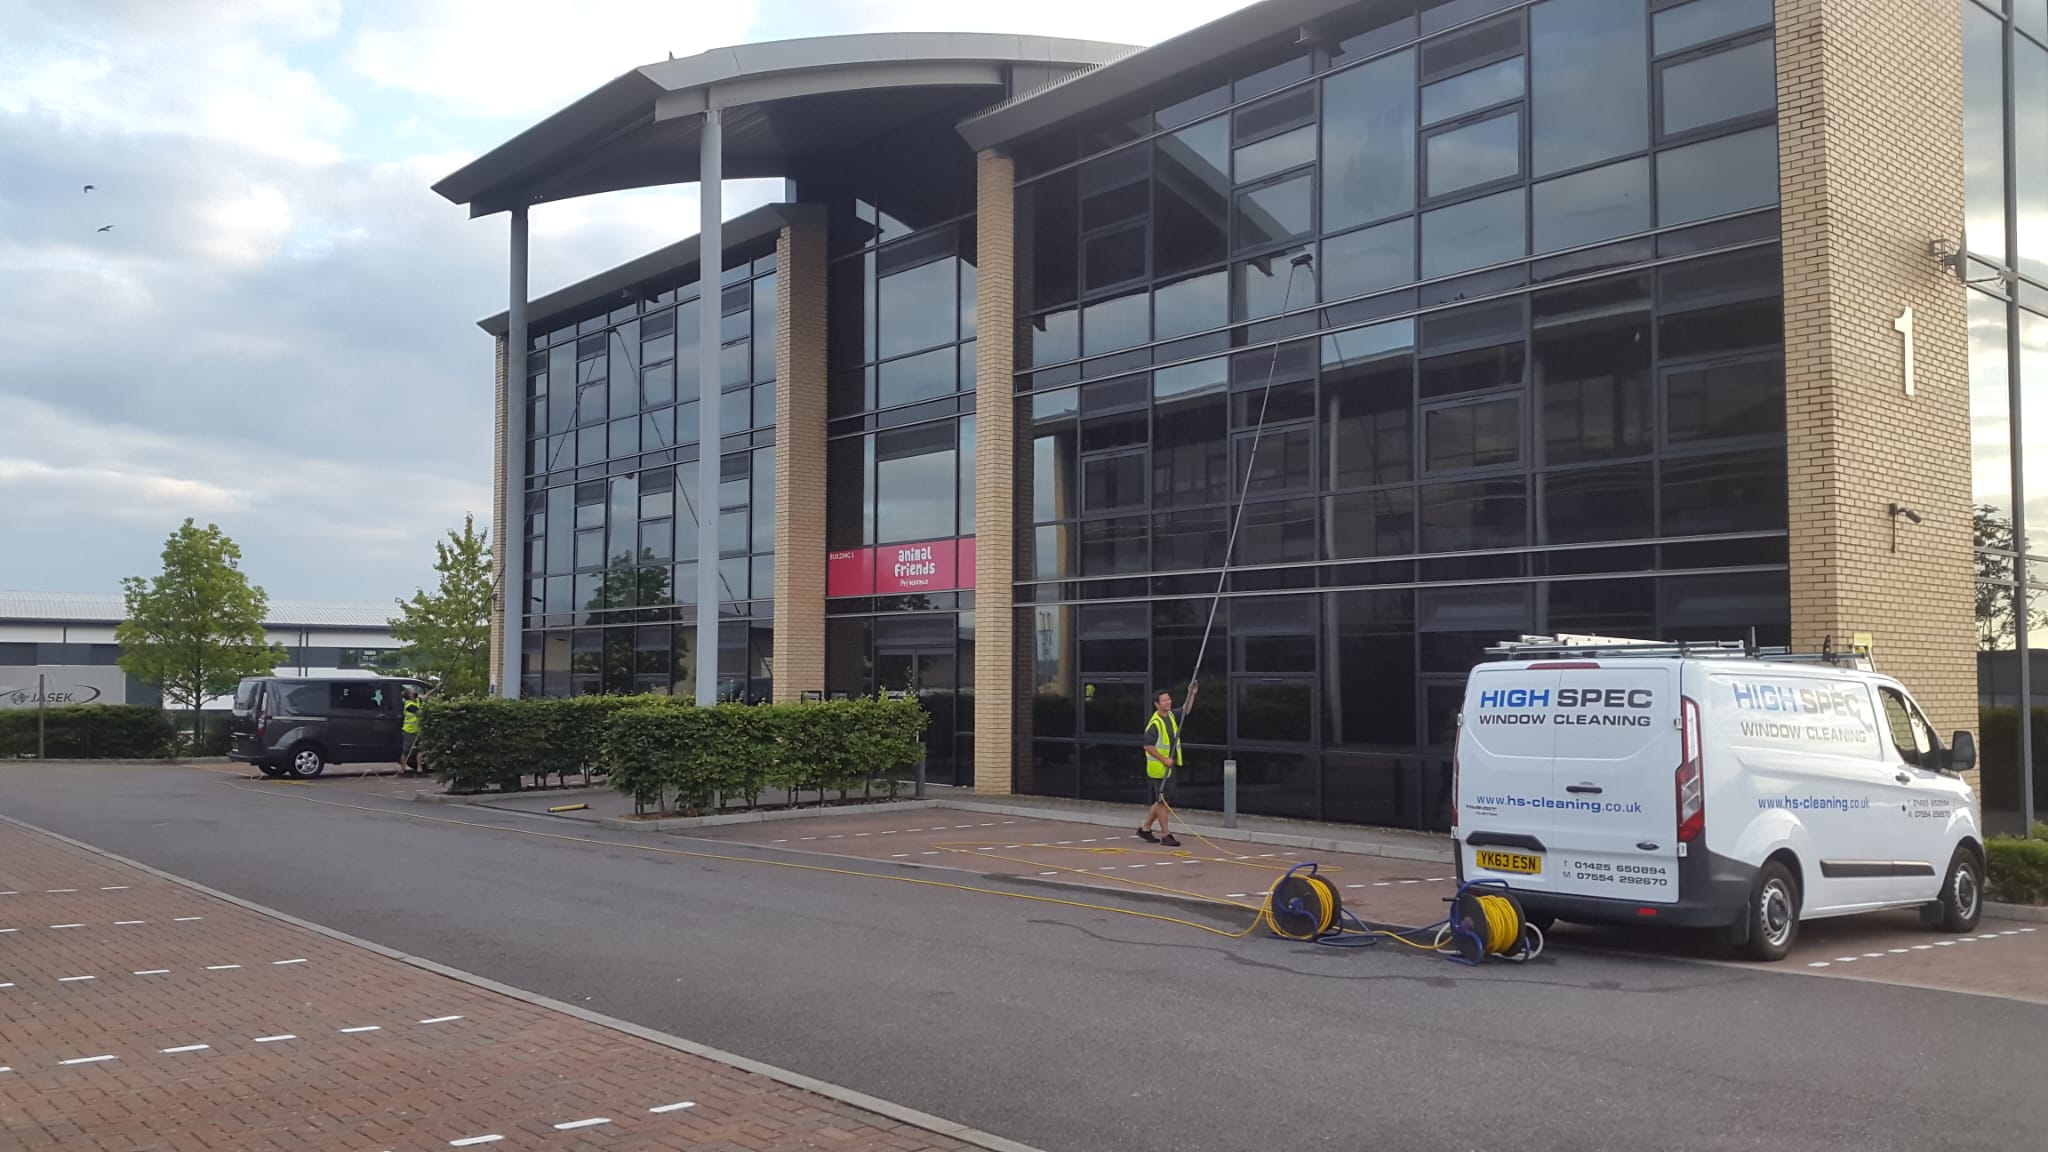 HighSpec window cleaners cleaning a commercial building with tall windows